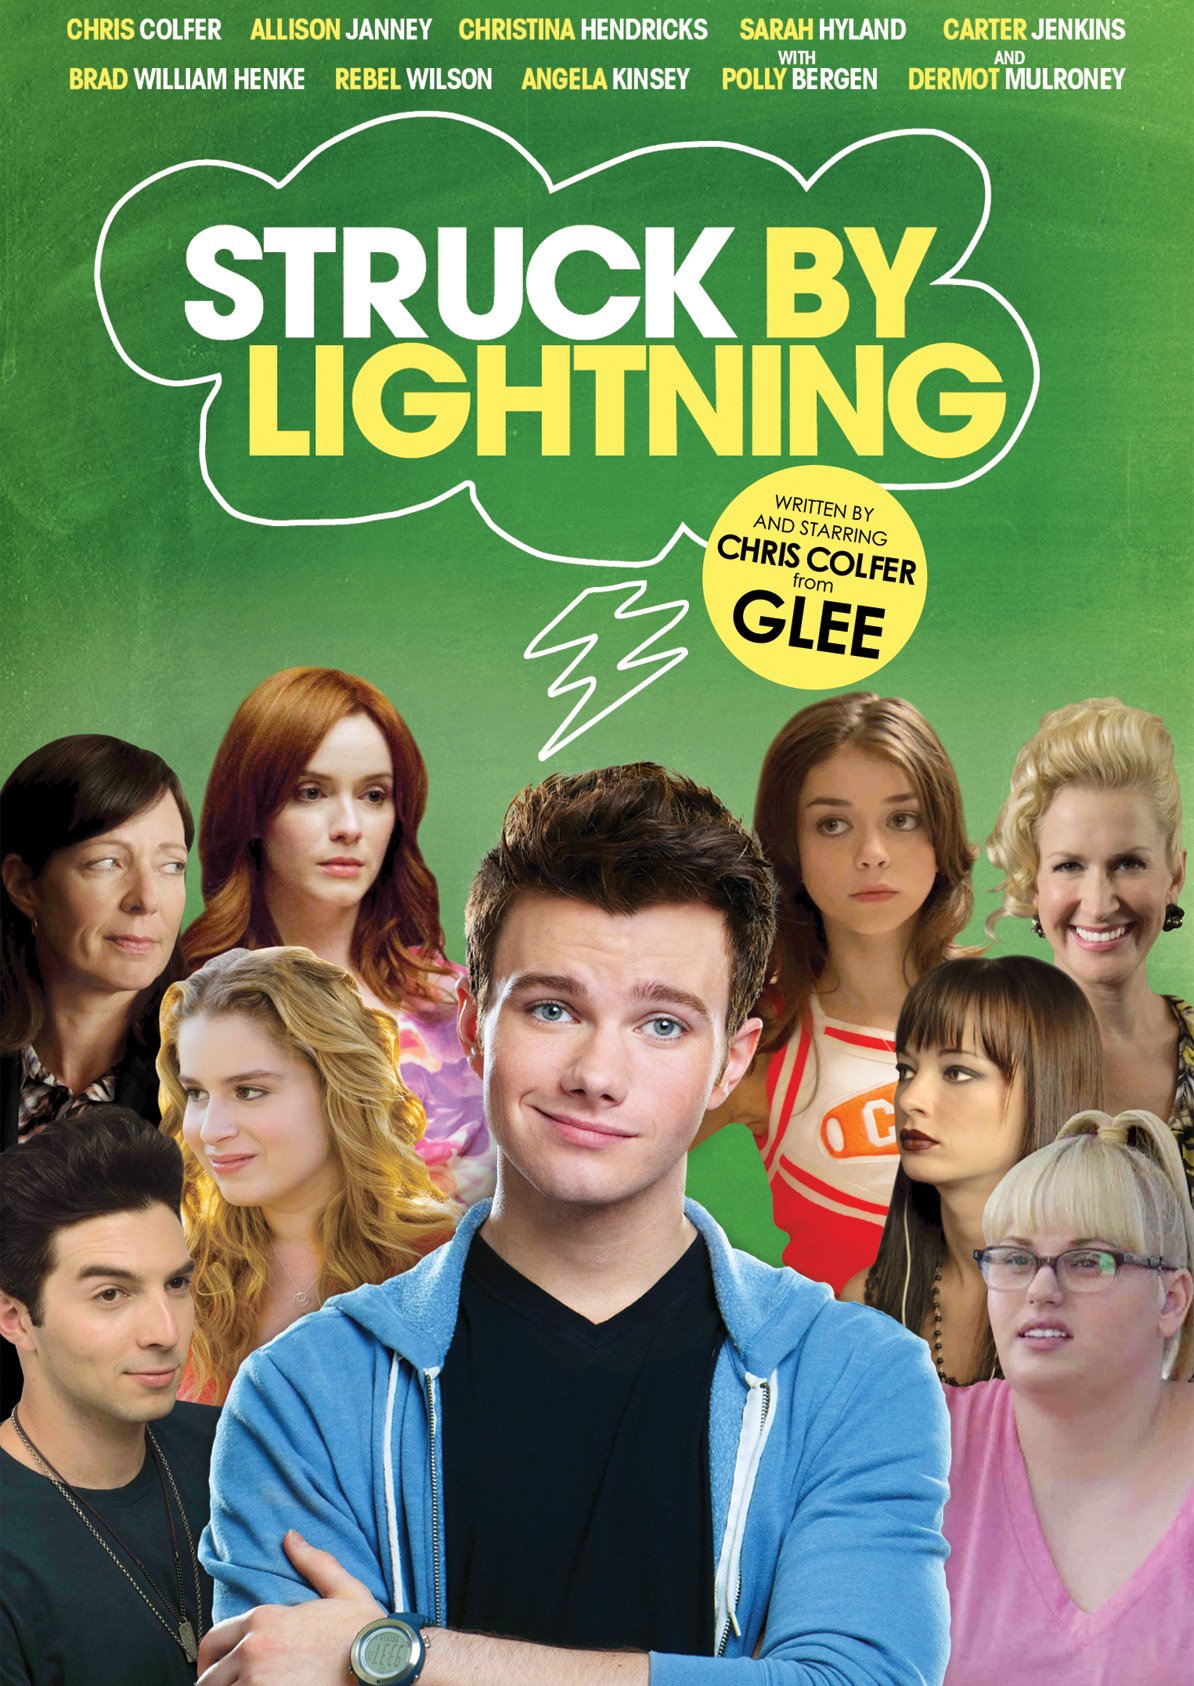 Struck by Lightning DVD Release Date May 21, 2013